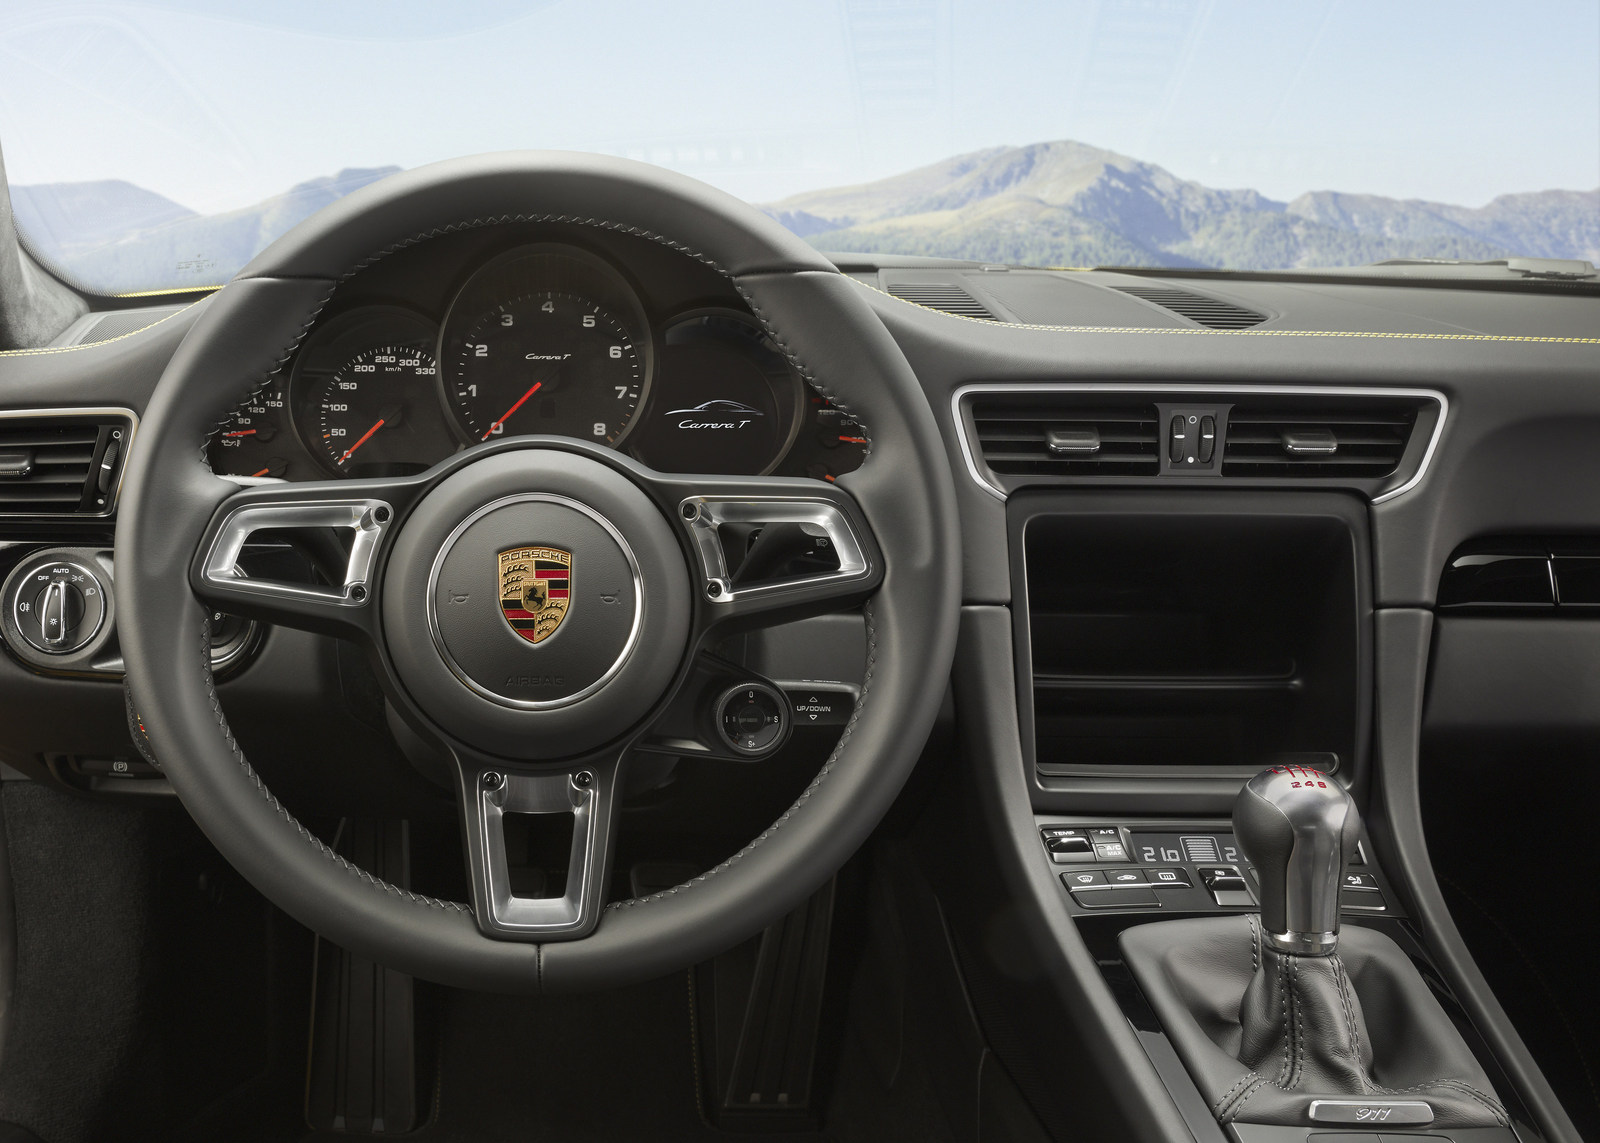 The 2018 Porsche 911 Carrera T Is The Lightest New 911 You Can Buy